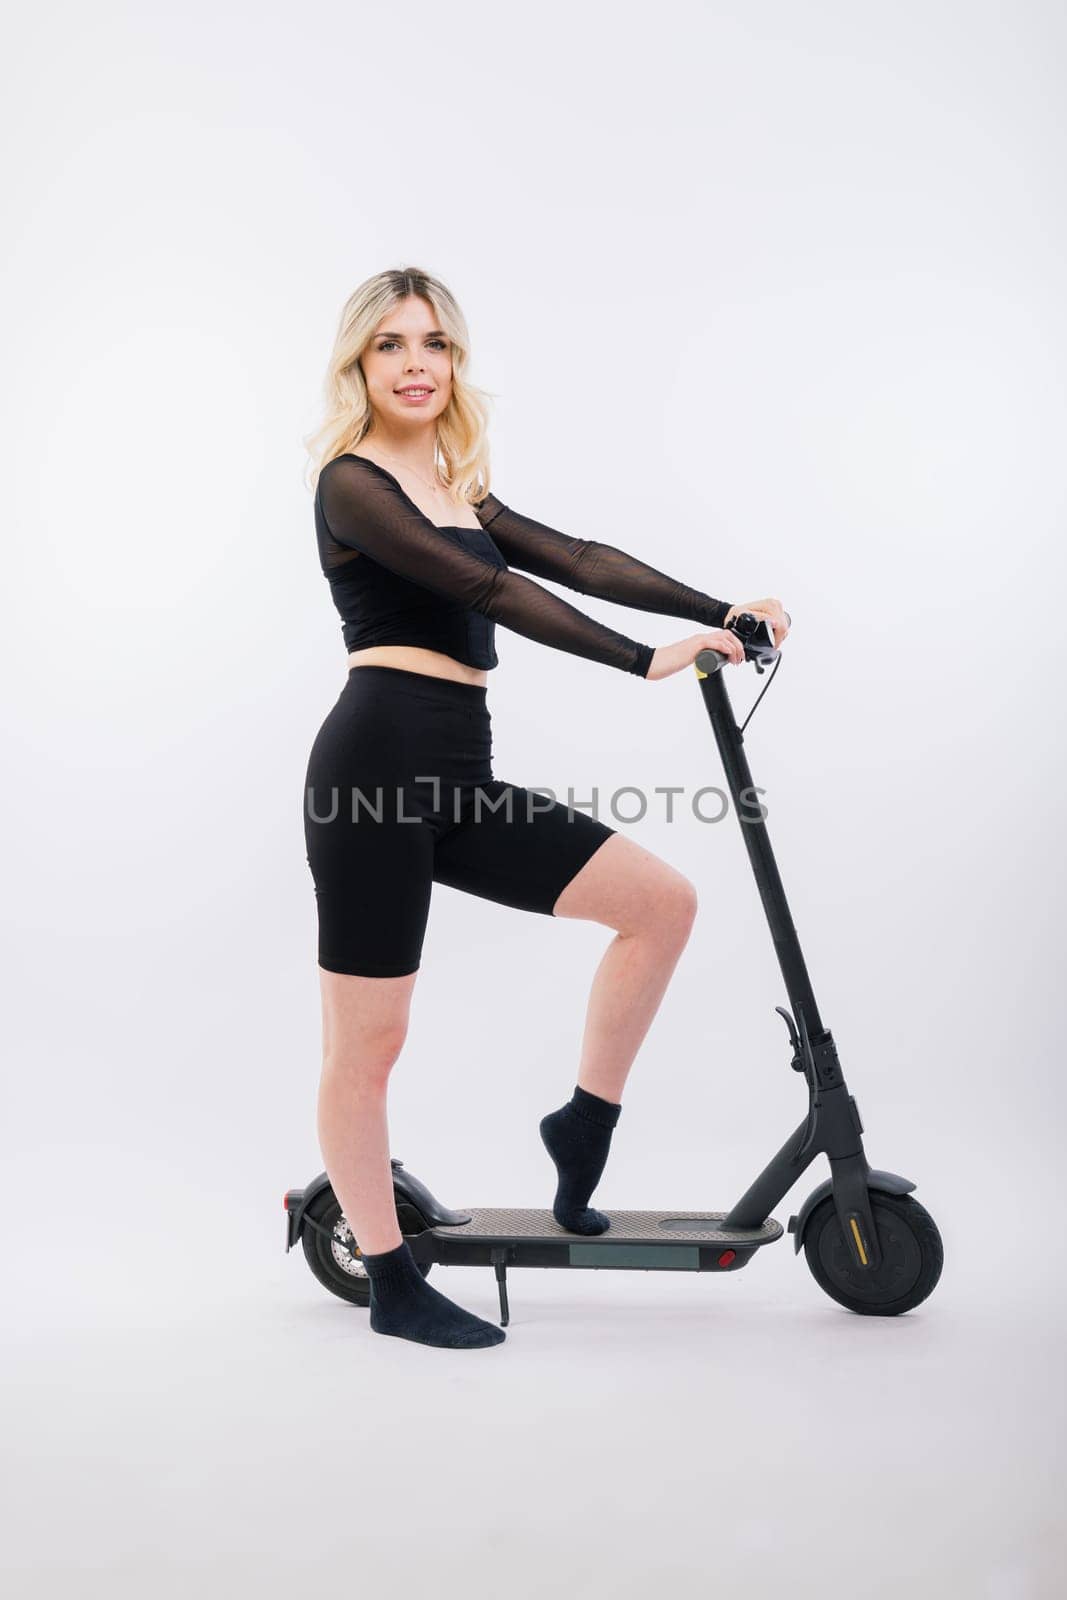 Female in a sport clothes stands on electric scooter with sunglasses on red and white background